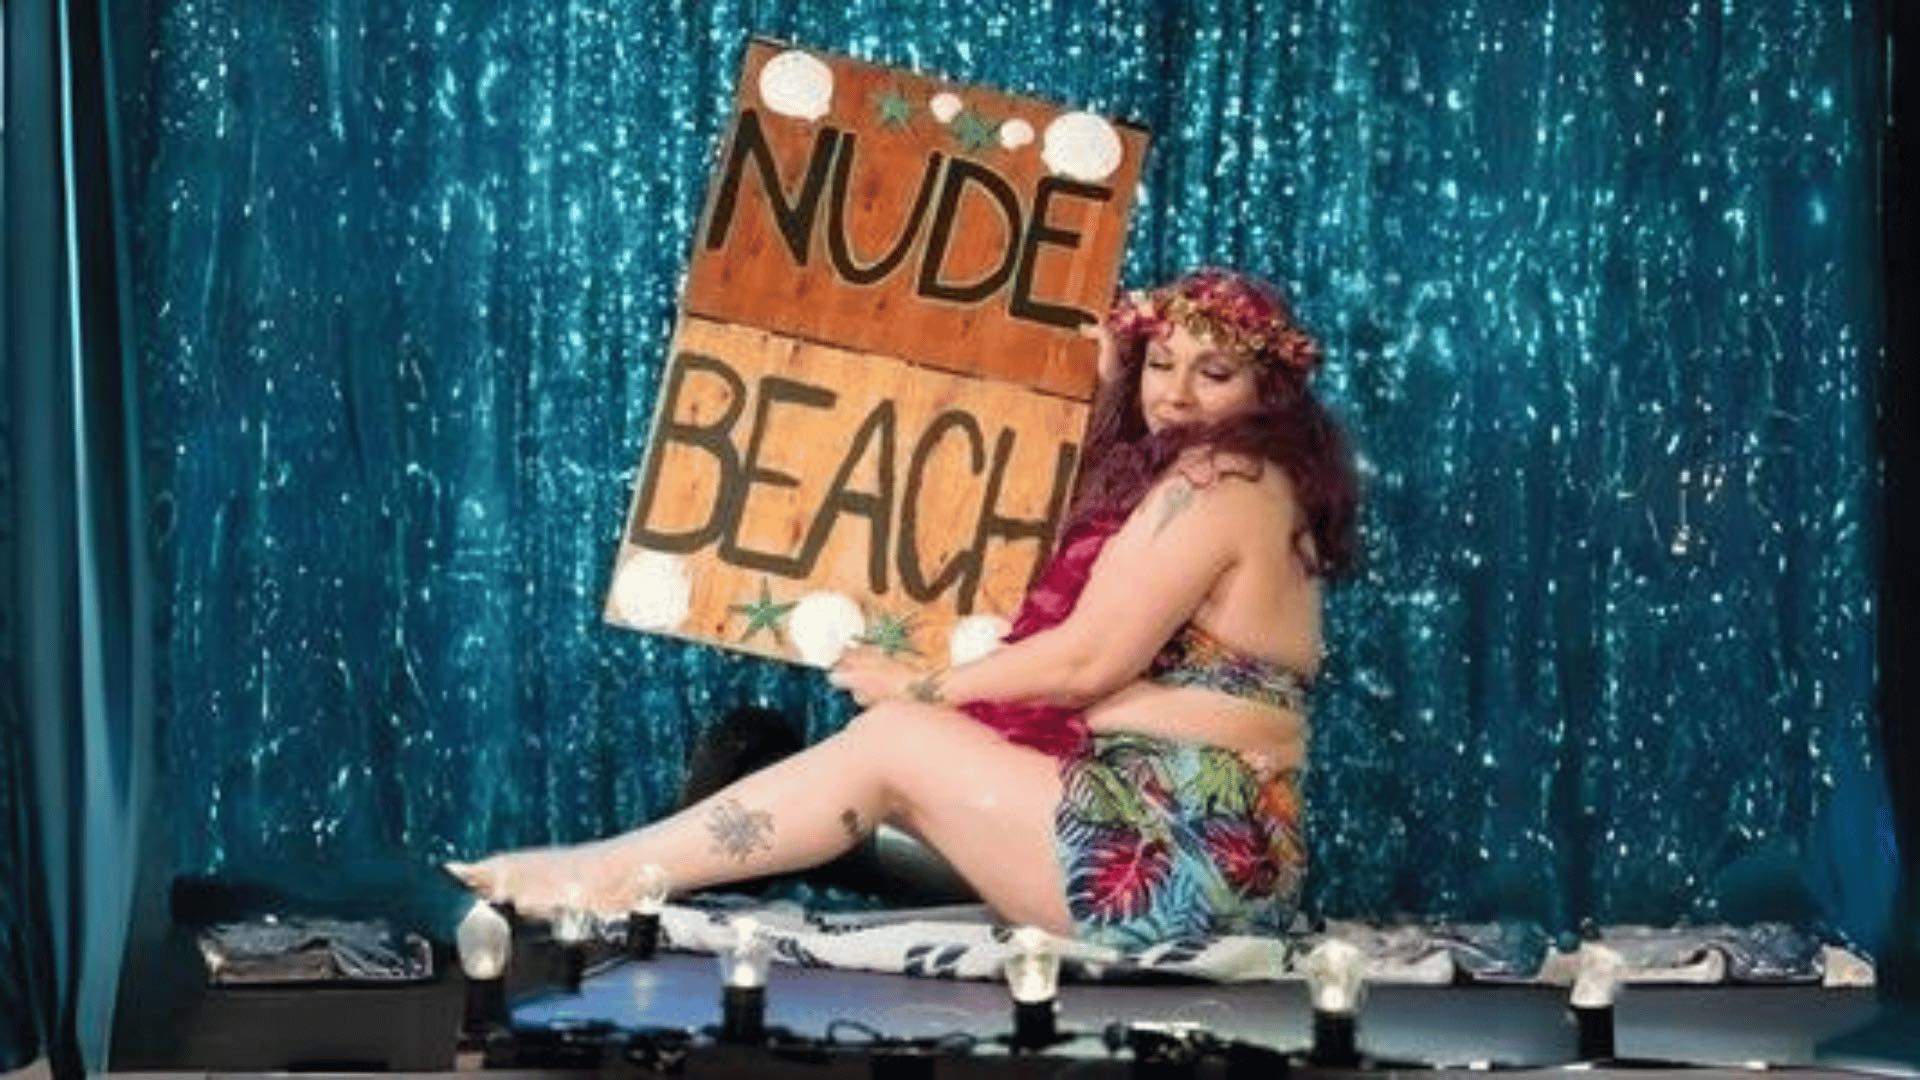 A person holding up a sign reading 'Nude Beach' in front of a sparkly blue backdrop.